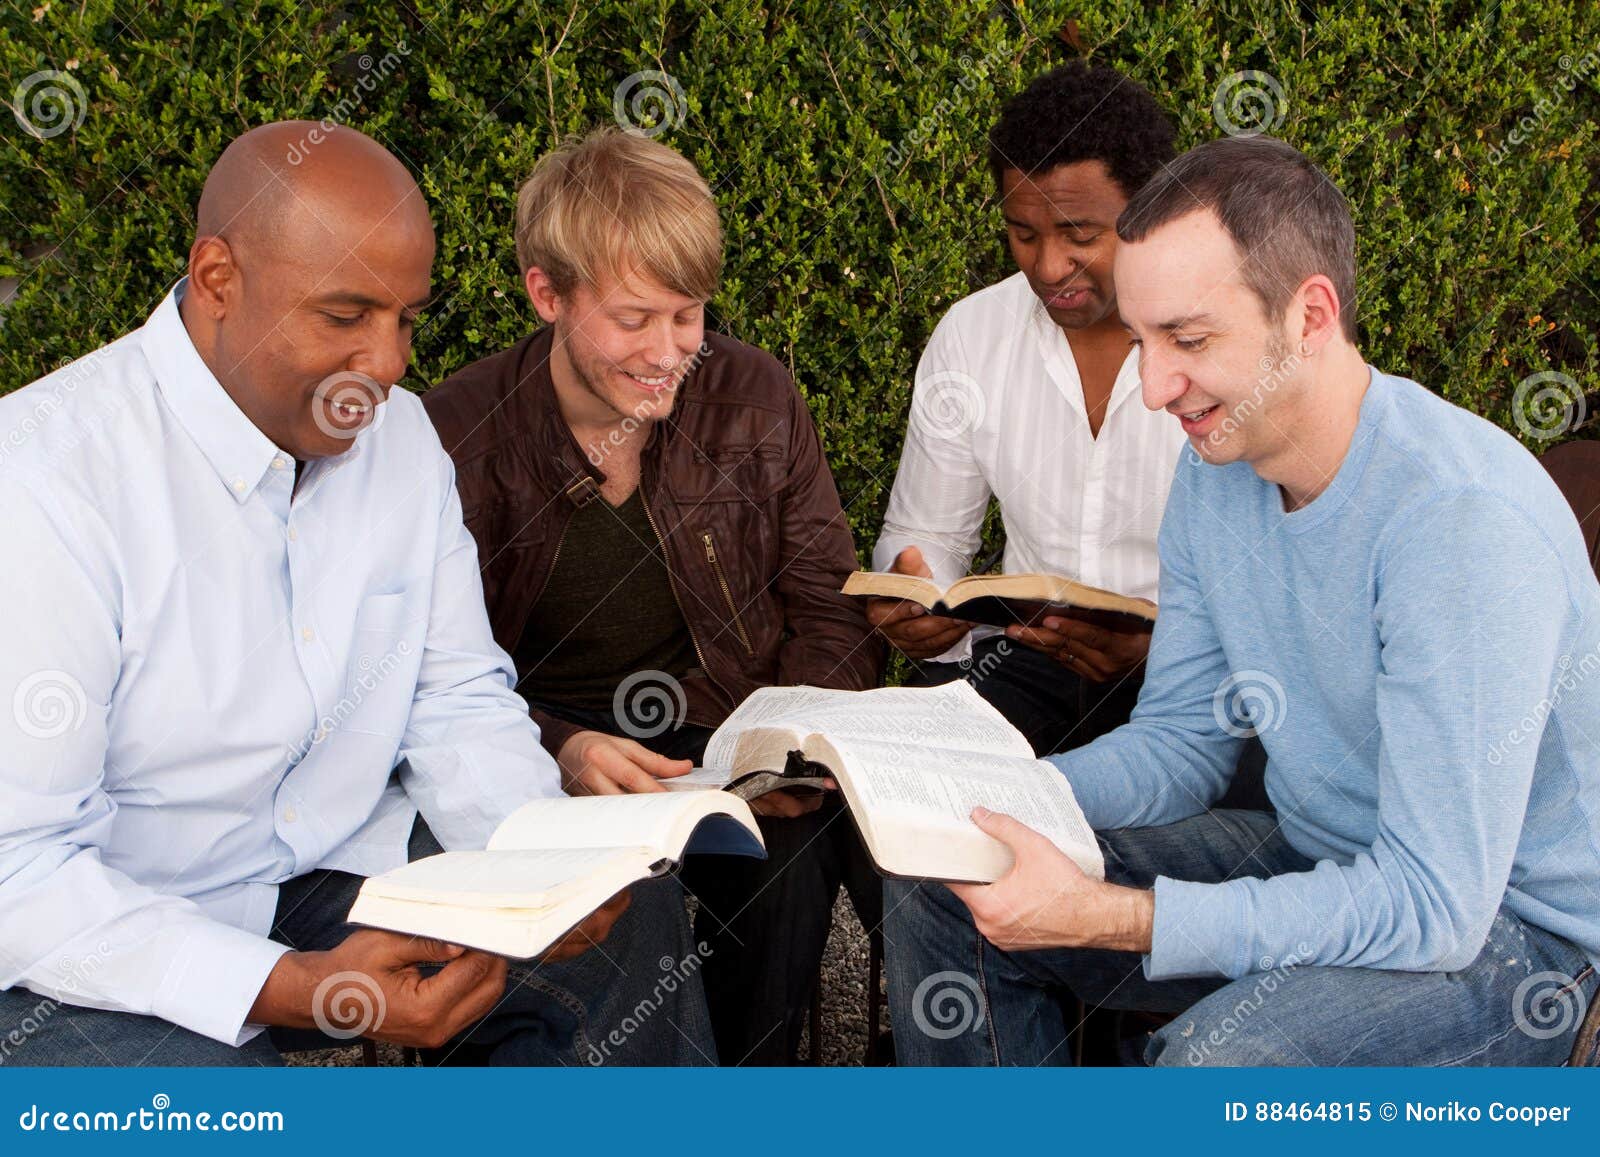 diverse group of men studying together.